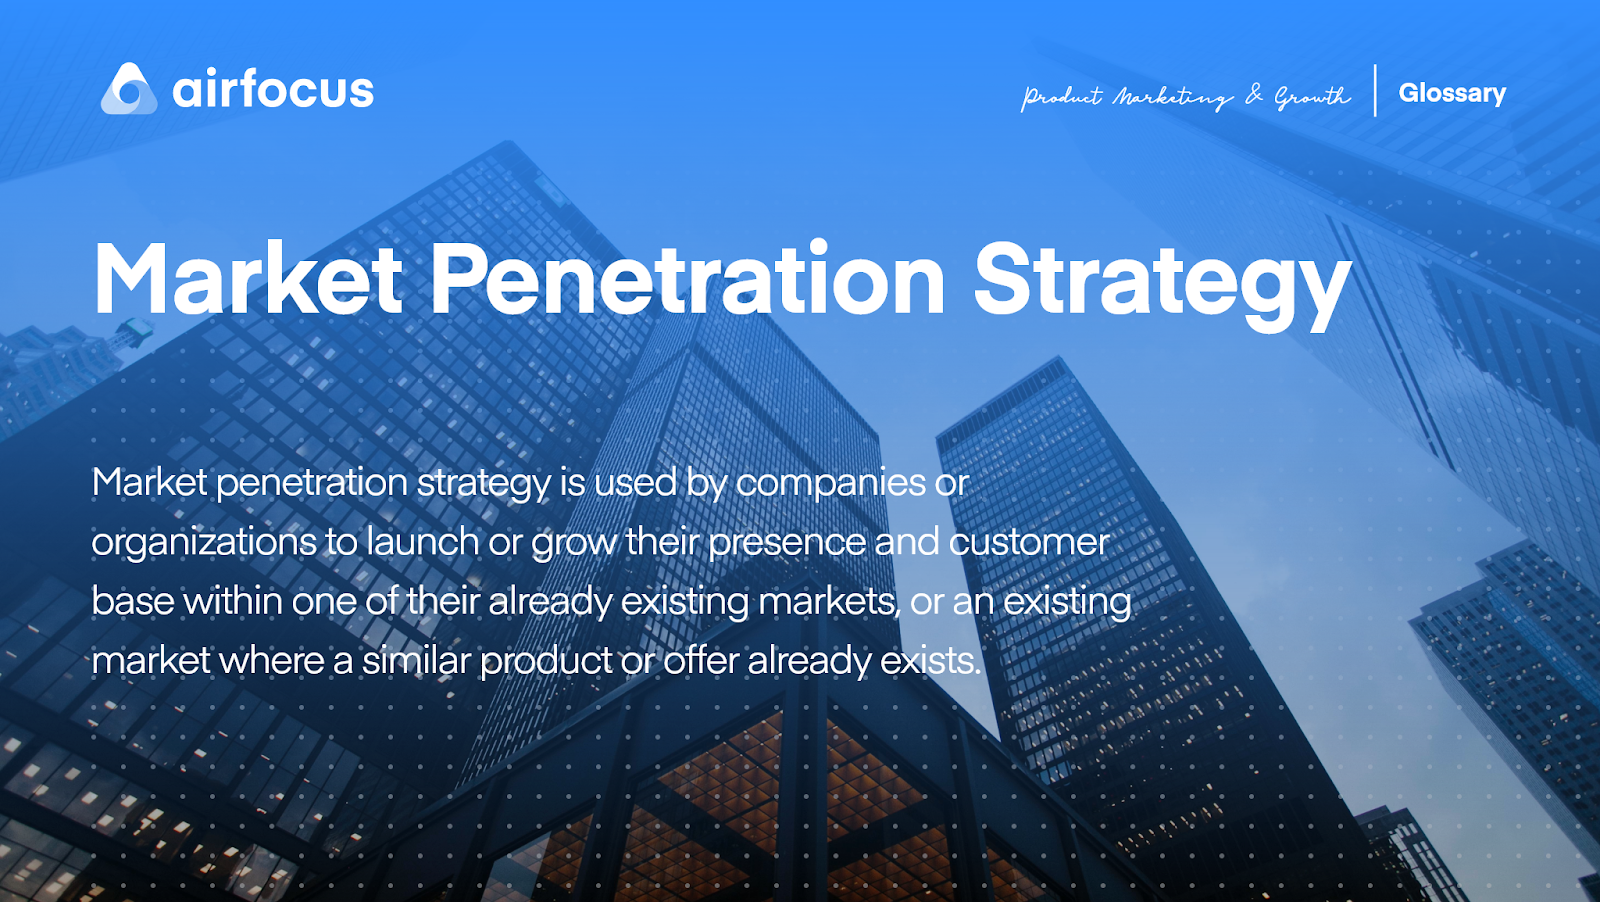 An infographic that provides a description of the market penetration strategy. 